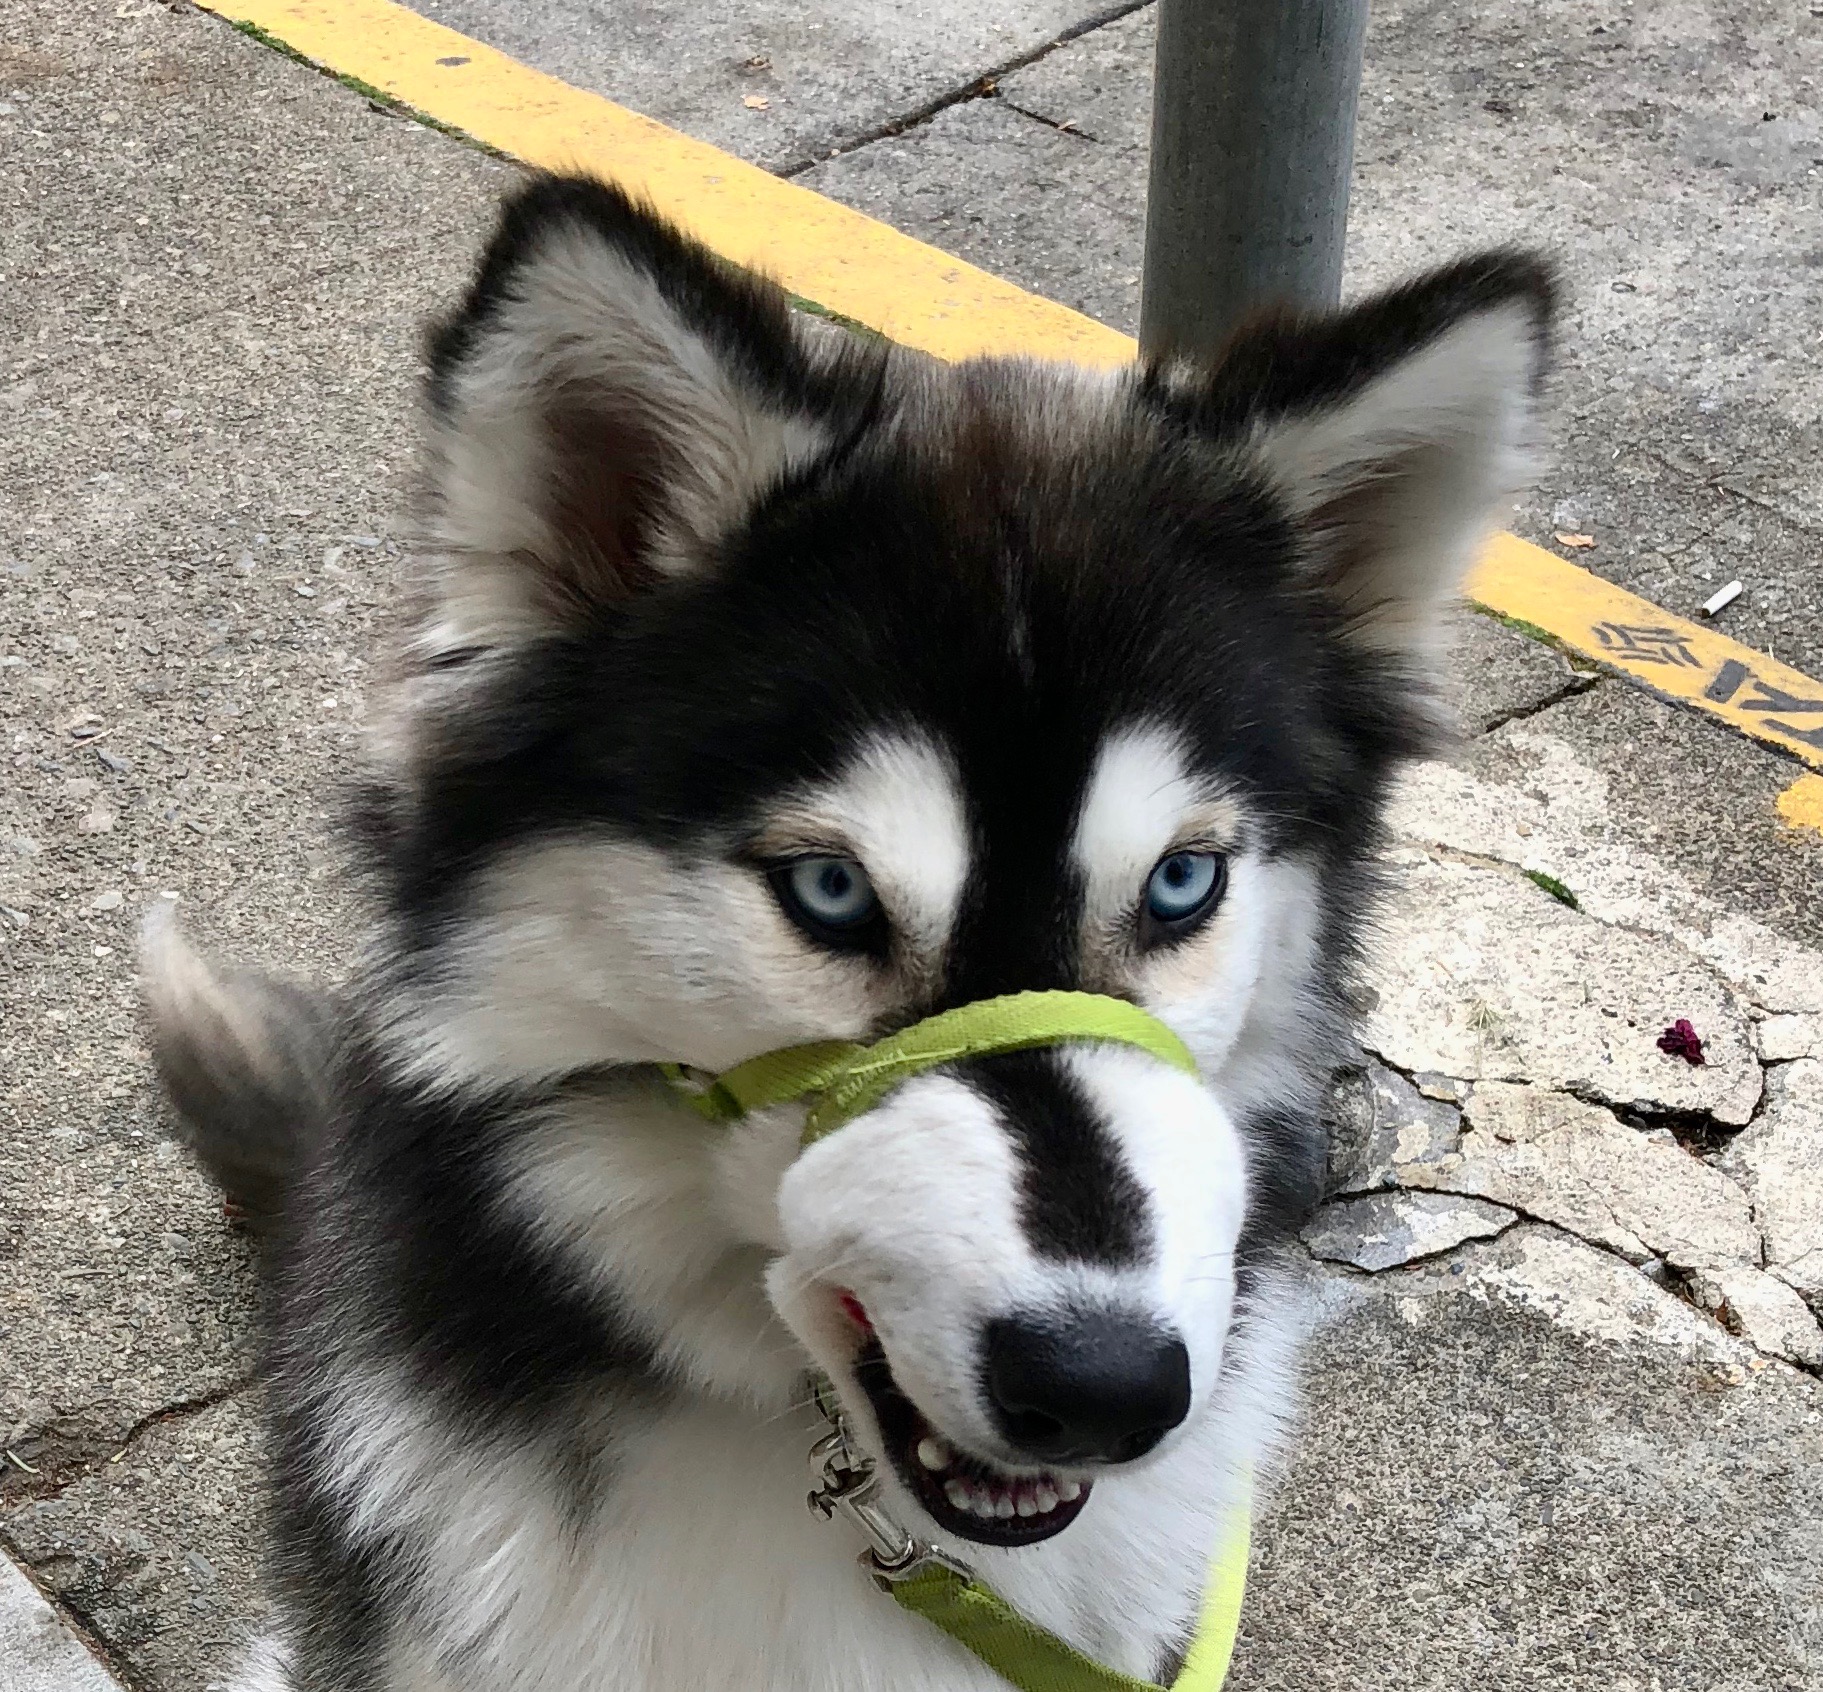 Siberian Husky Wearing Halter Lead That Is All Twisted Up Around Her Muzzle